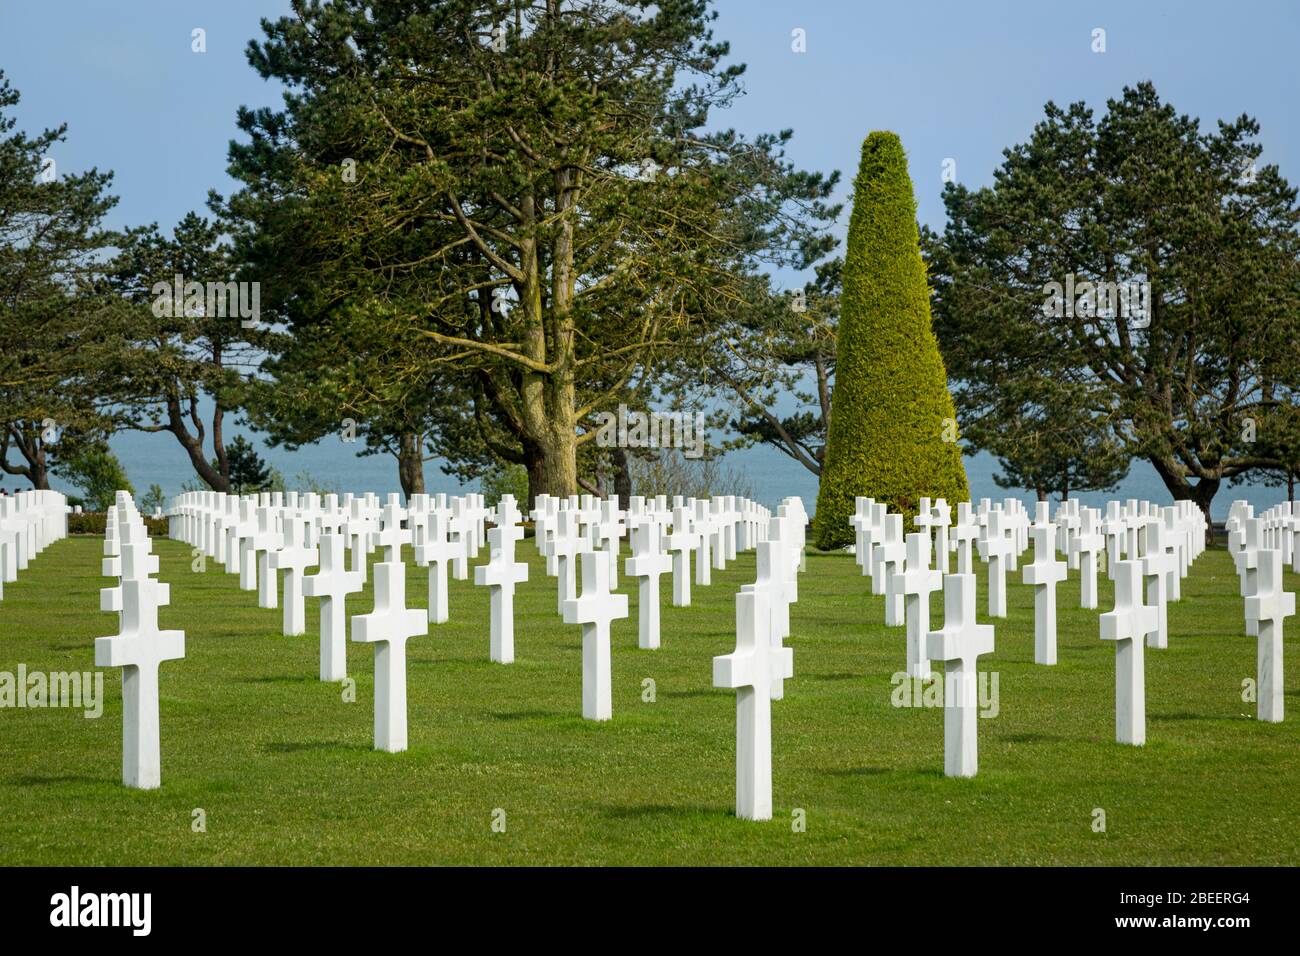 Perfectly placed crosses at the American Cemetery, Colleville-sur-Mer, Normandy France Stock Photo